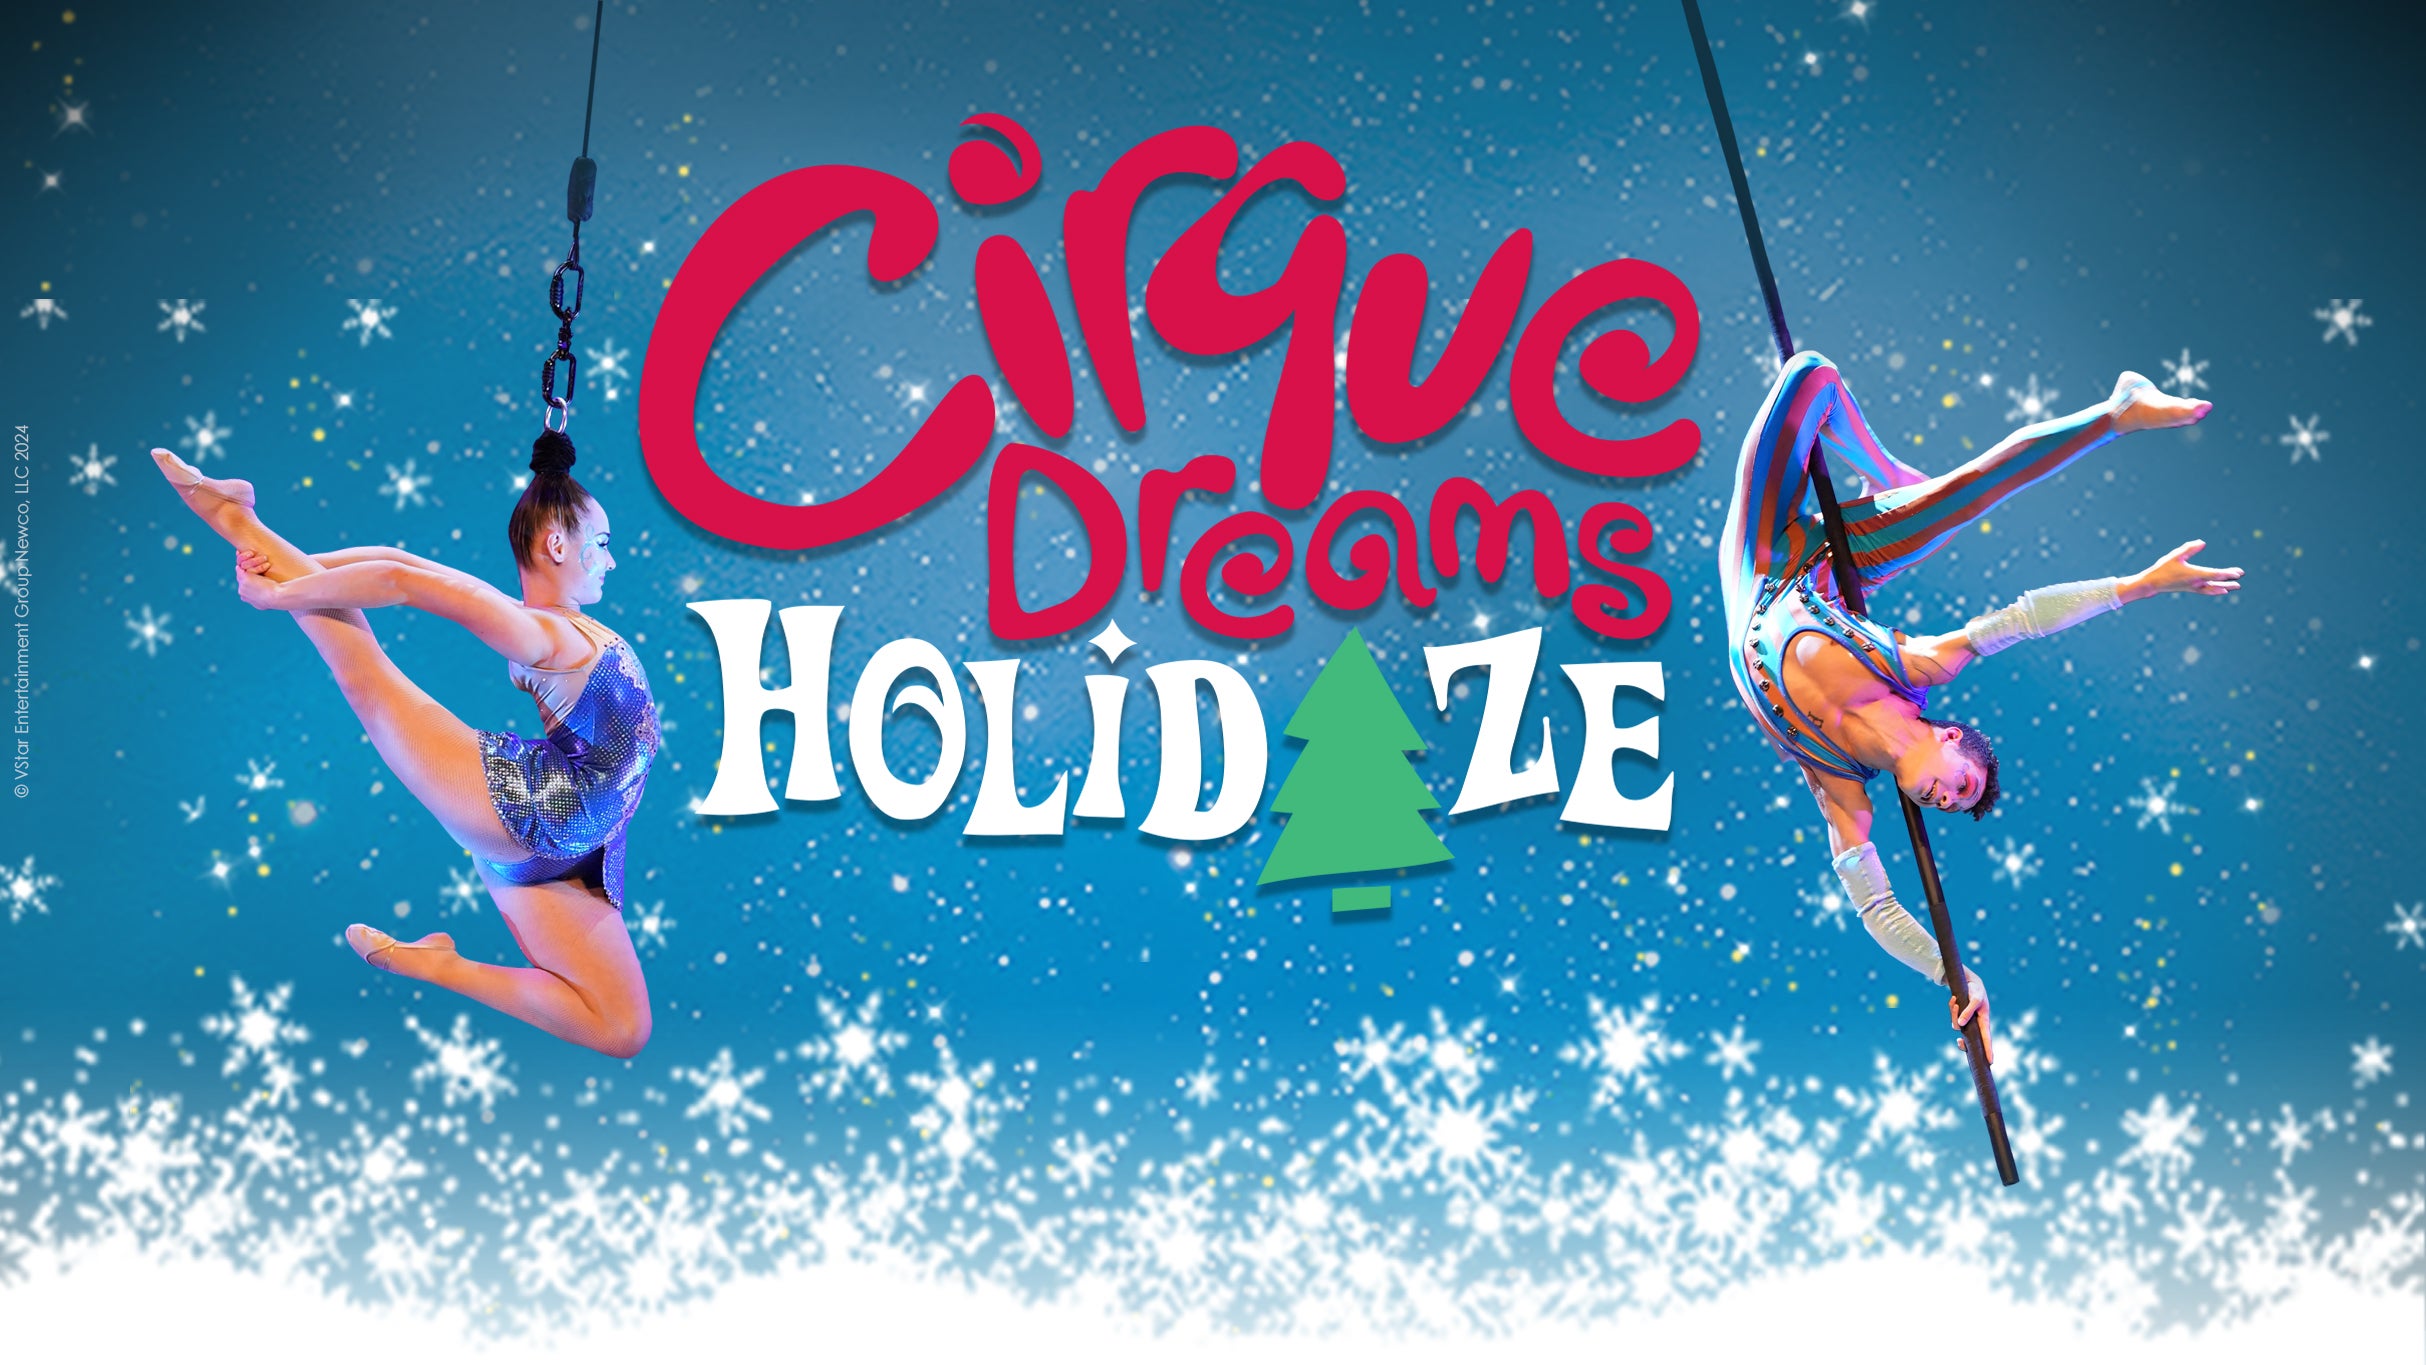 Cirque Dreams Holidaze (Touring) in Sioux City promo photo for Exclusive presale offer code